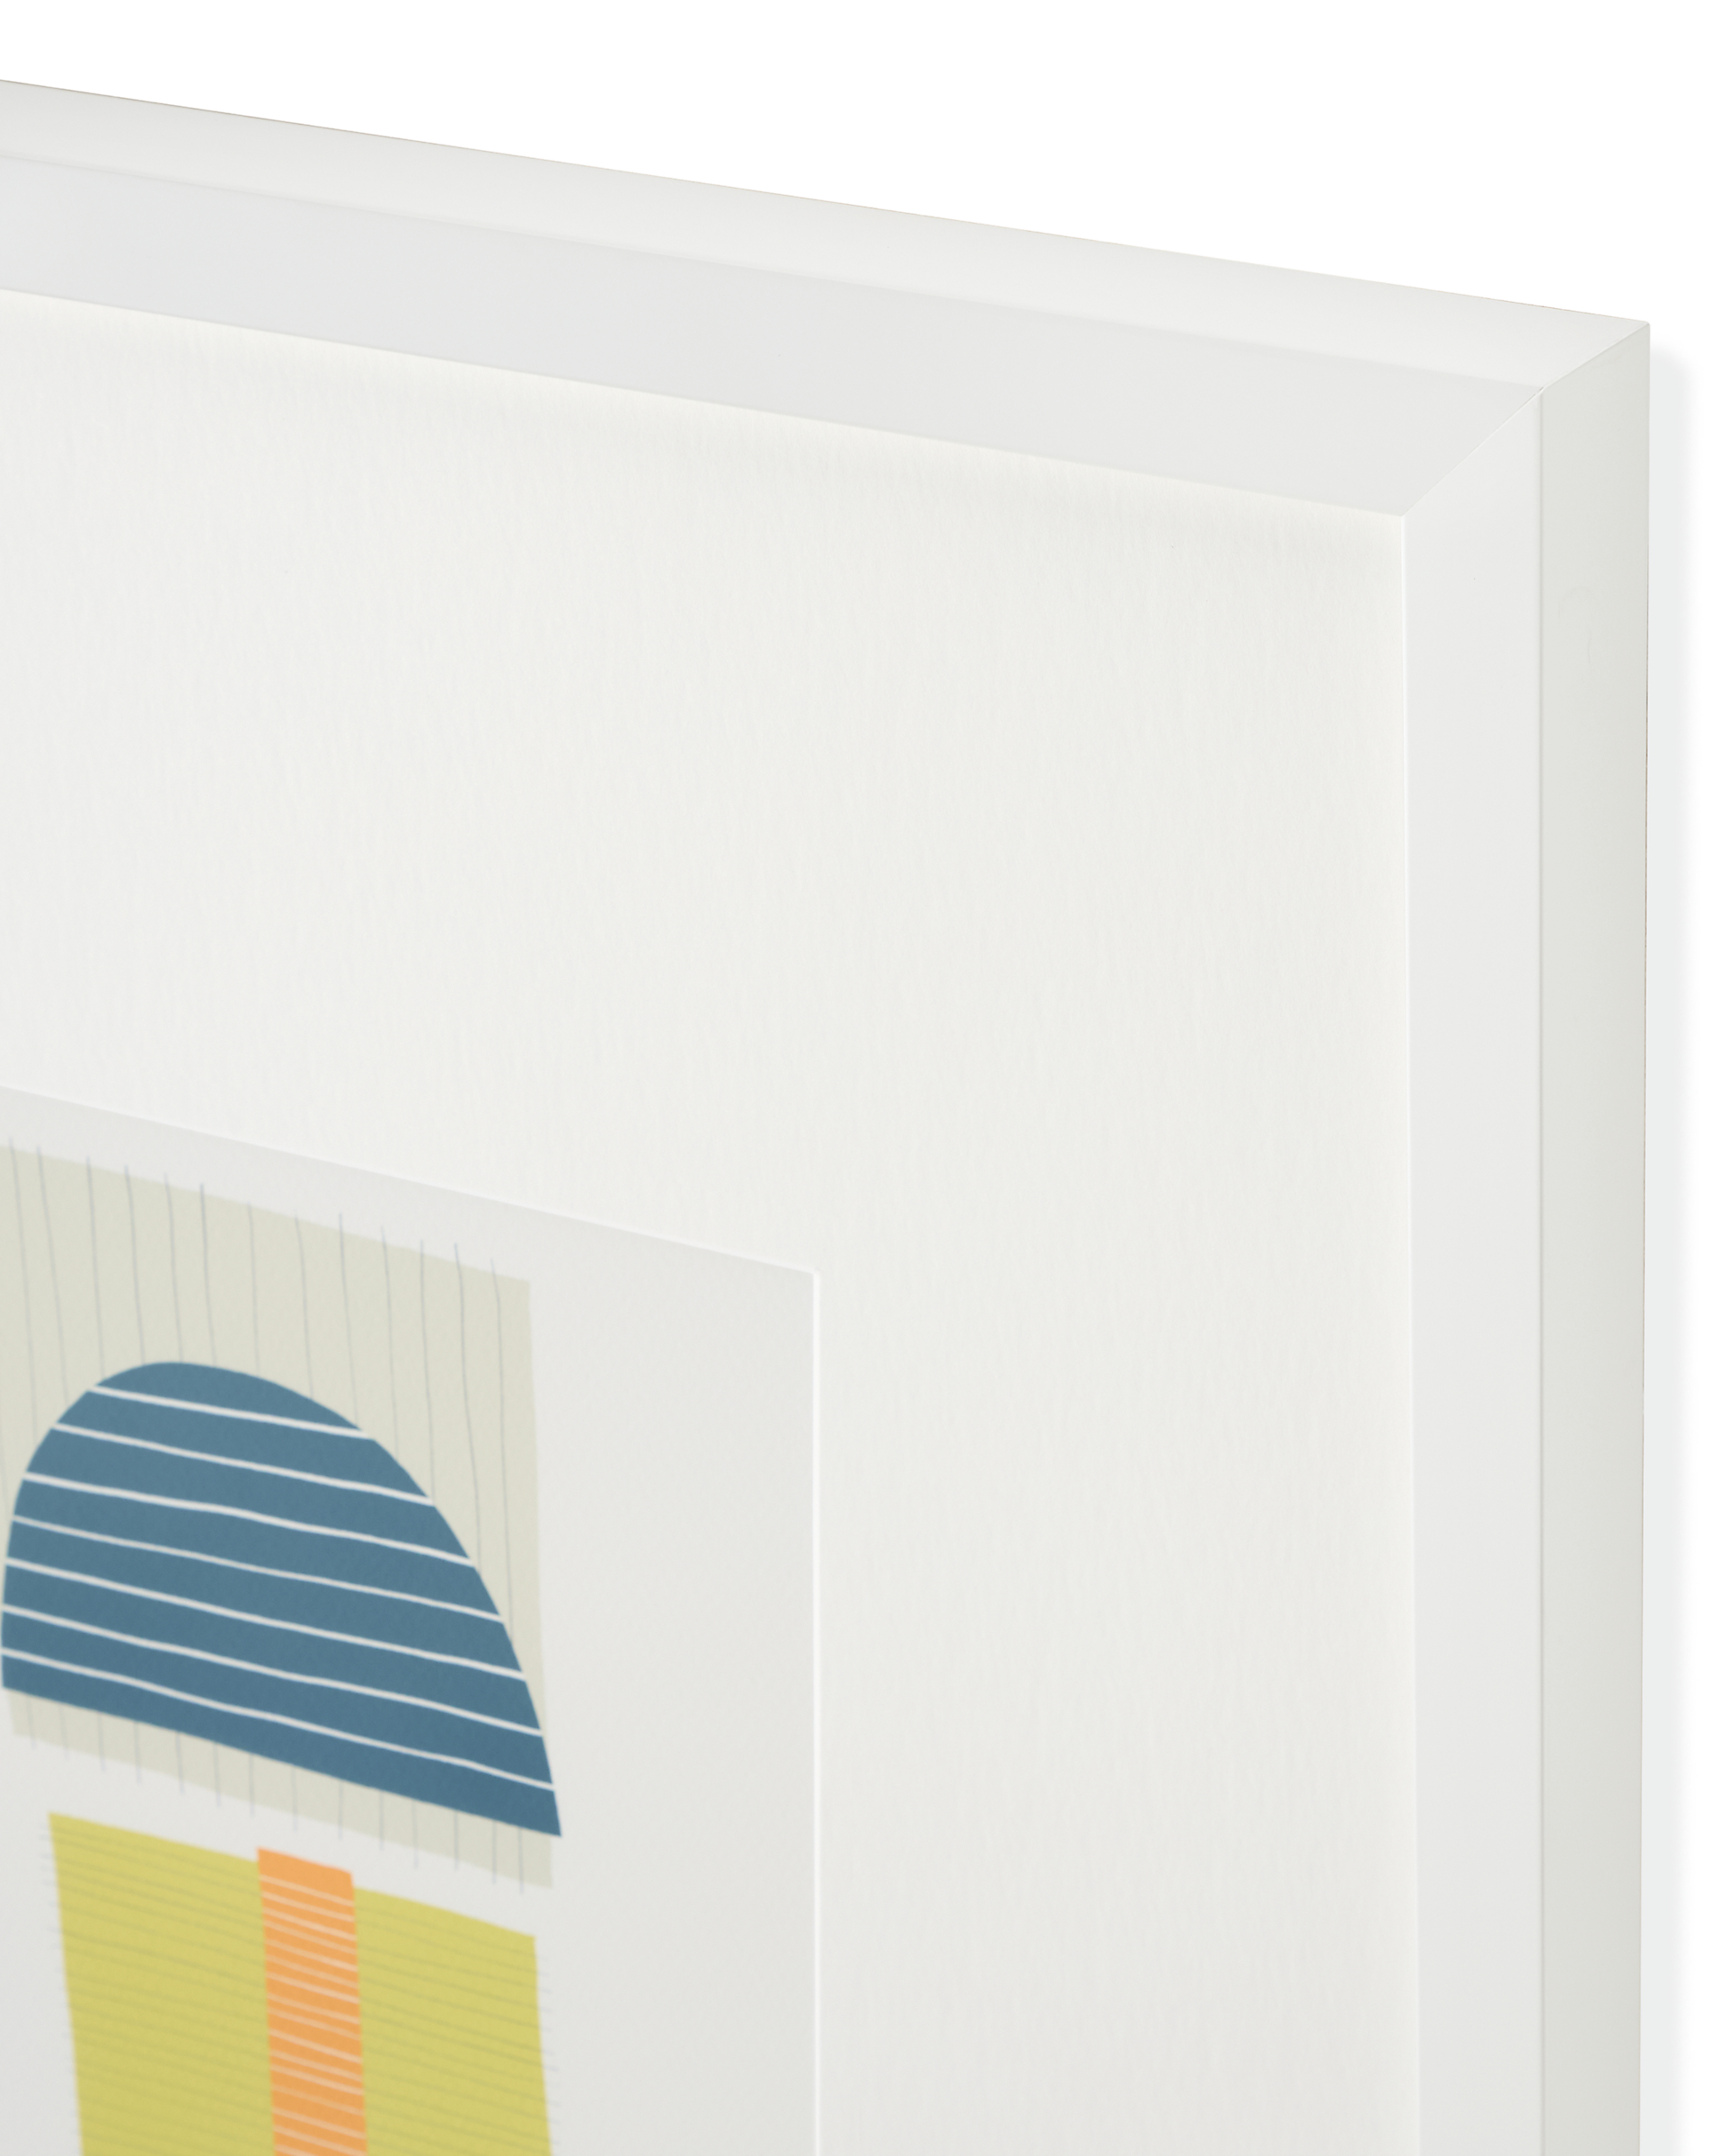 Corner detail of Jorey Hurley artwork, colorful shapes abstract 1 with white frame.